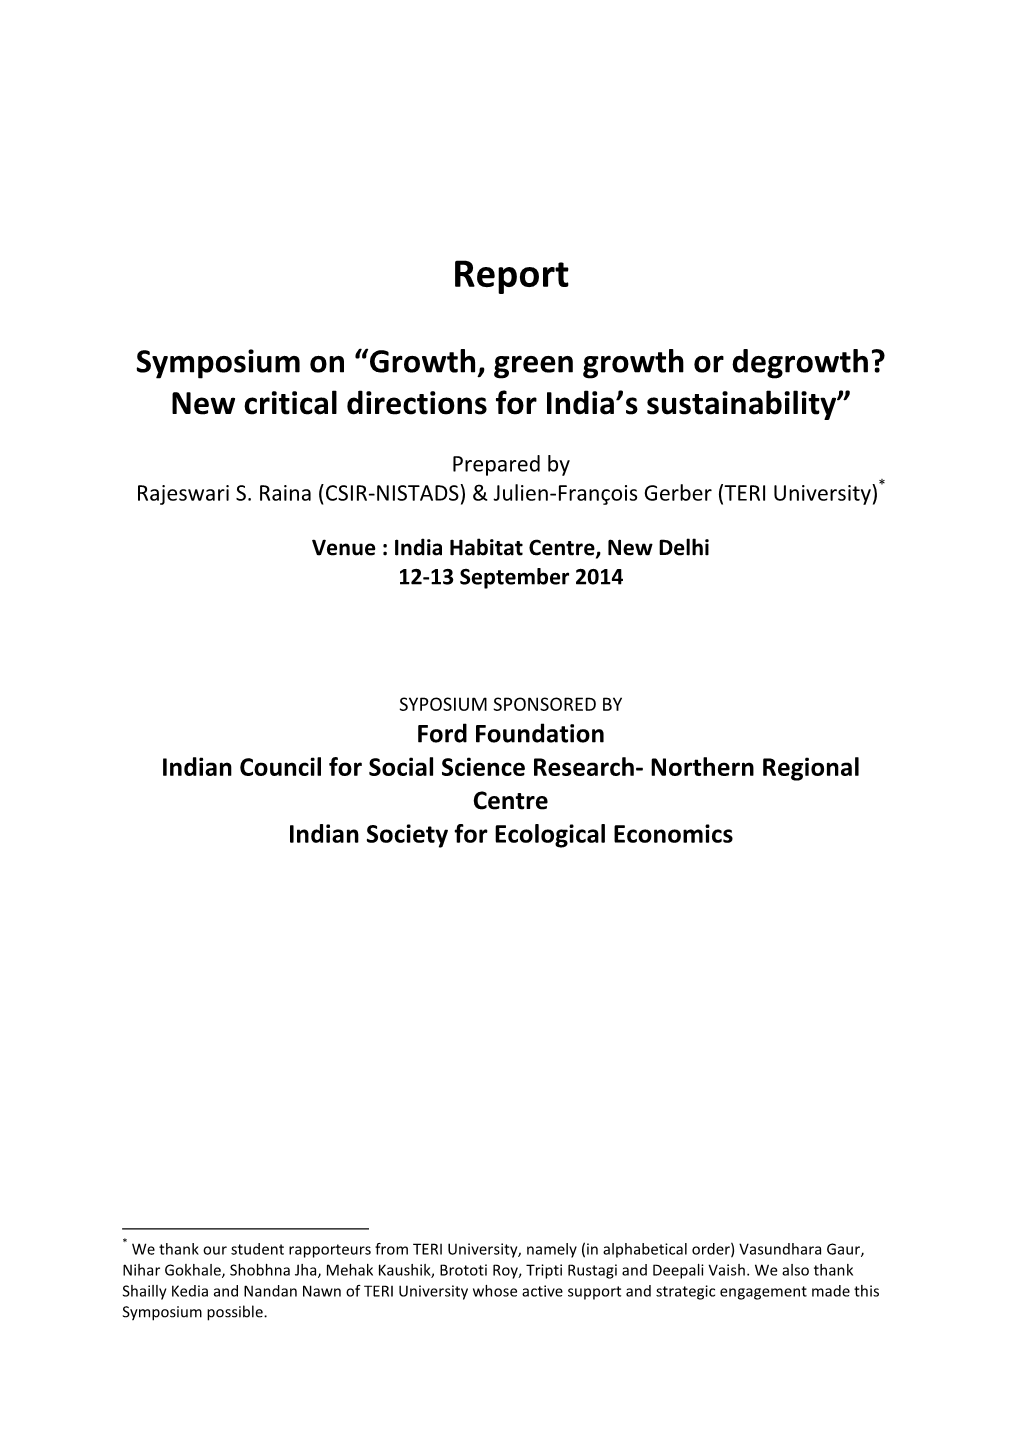 A Report on the Symposium on “Growth, Green Growth Or Degrowth?: New Critical Directions for India's